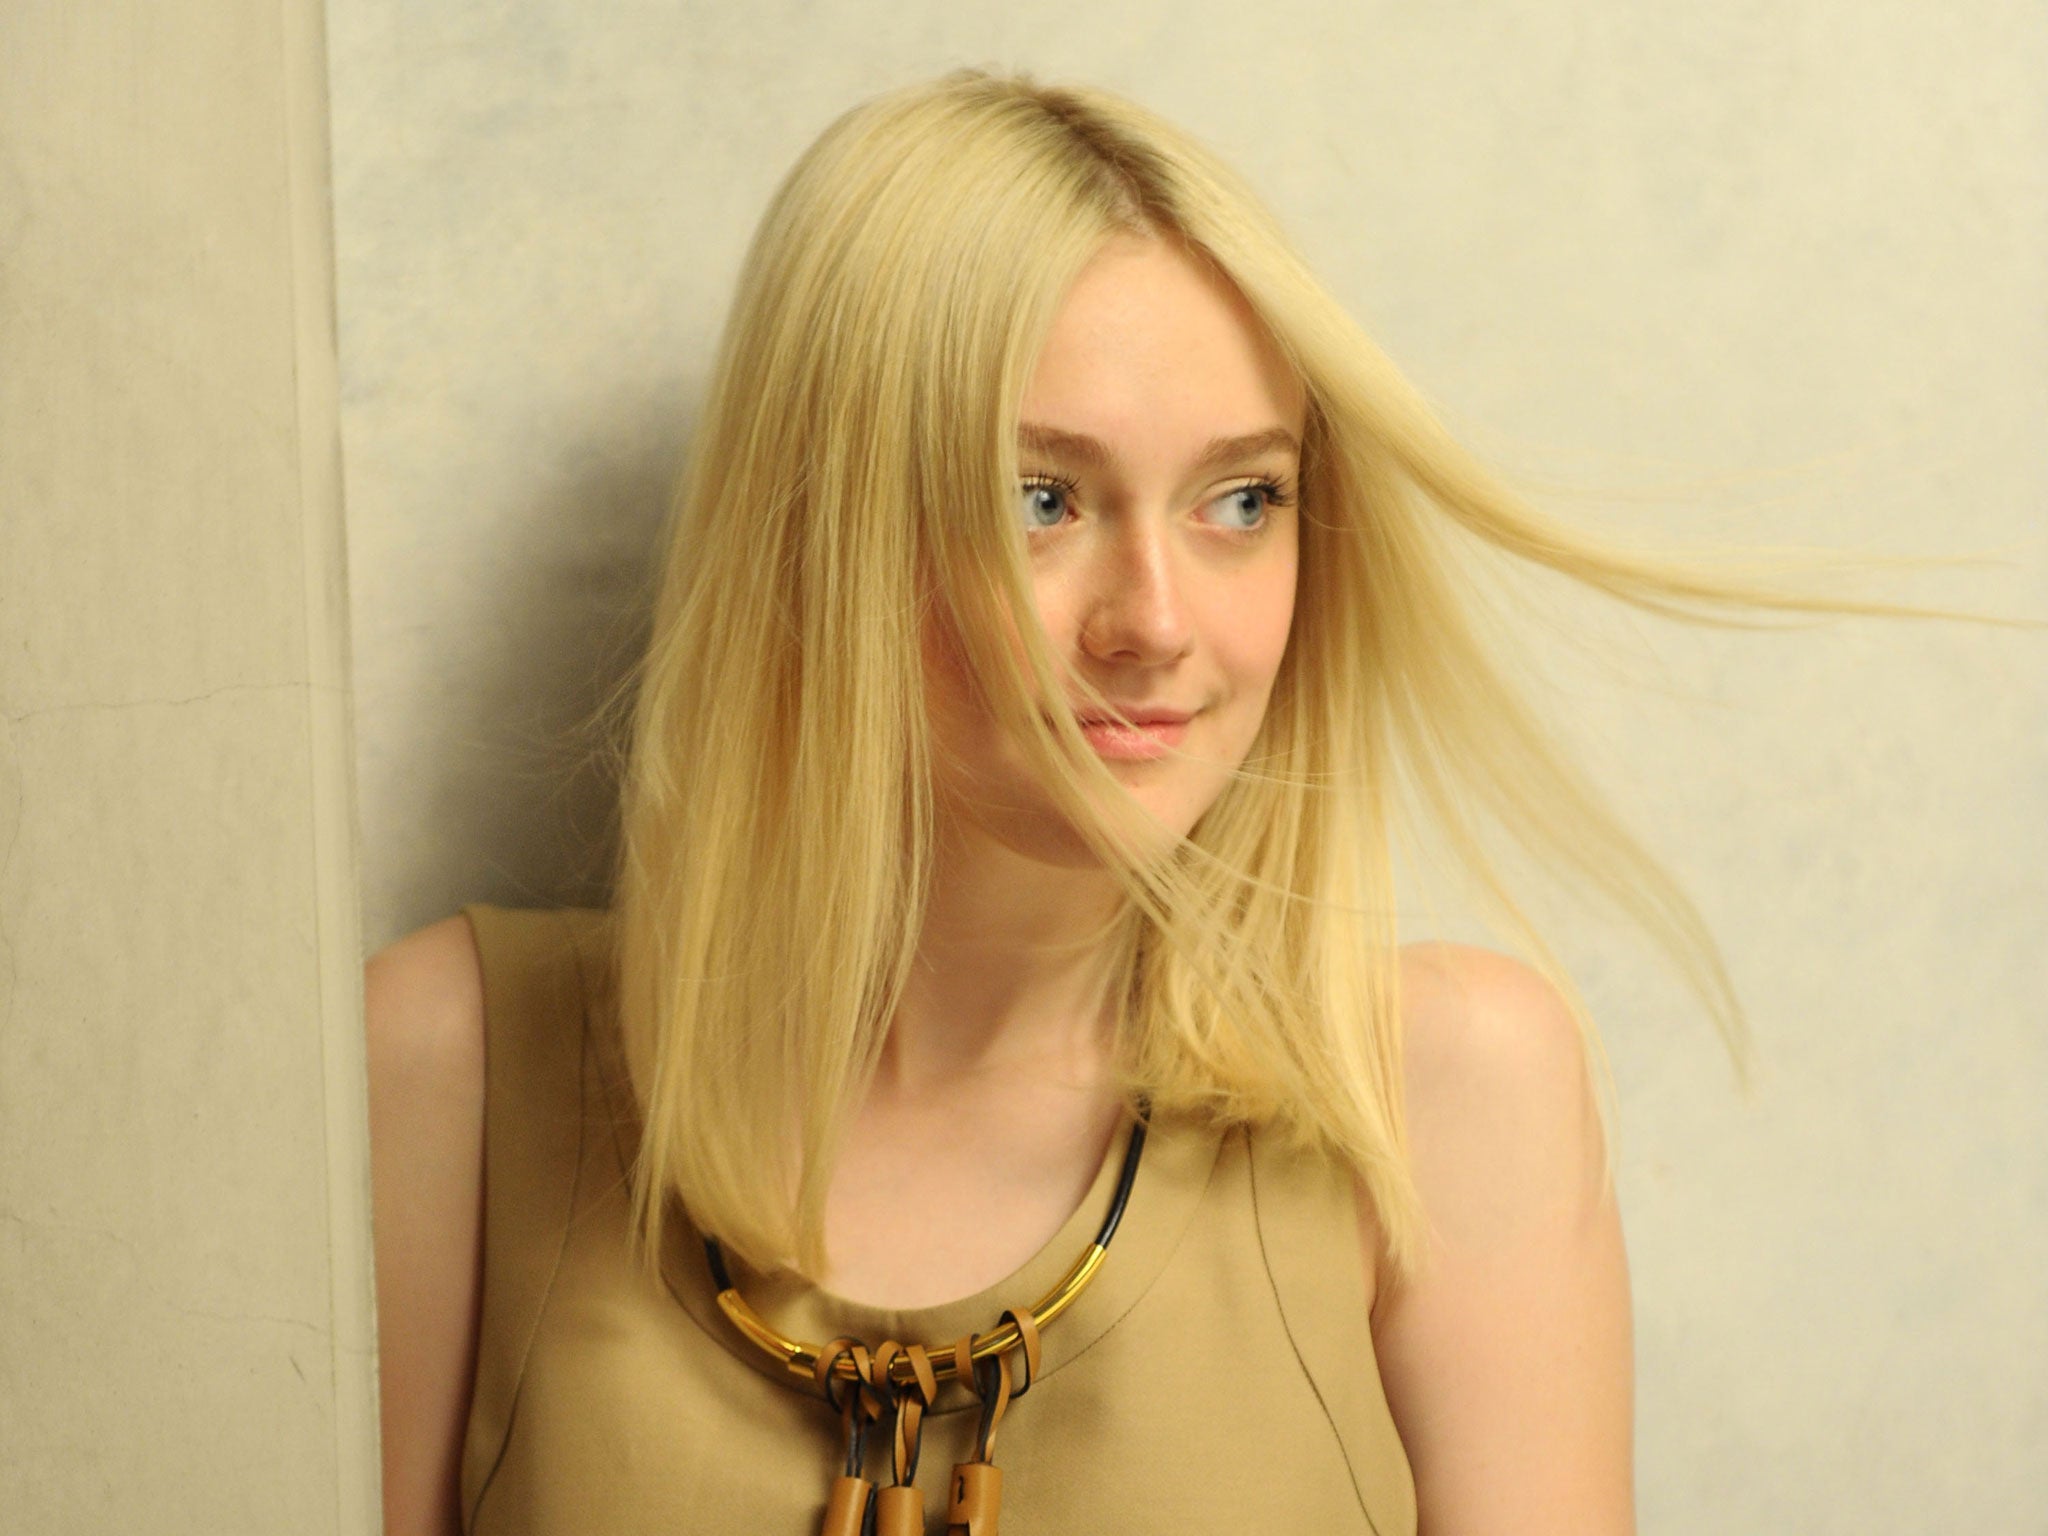 Dakota Fanning interview: How to grow up gracefully | The Independent | Independent